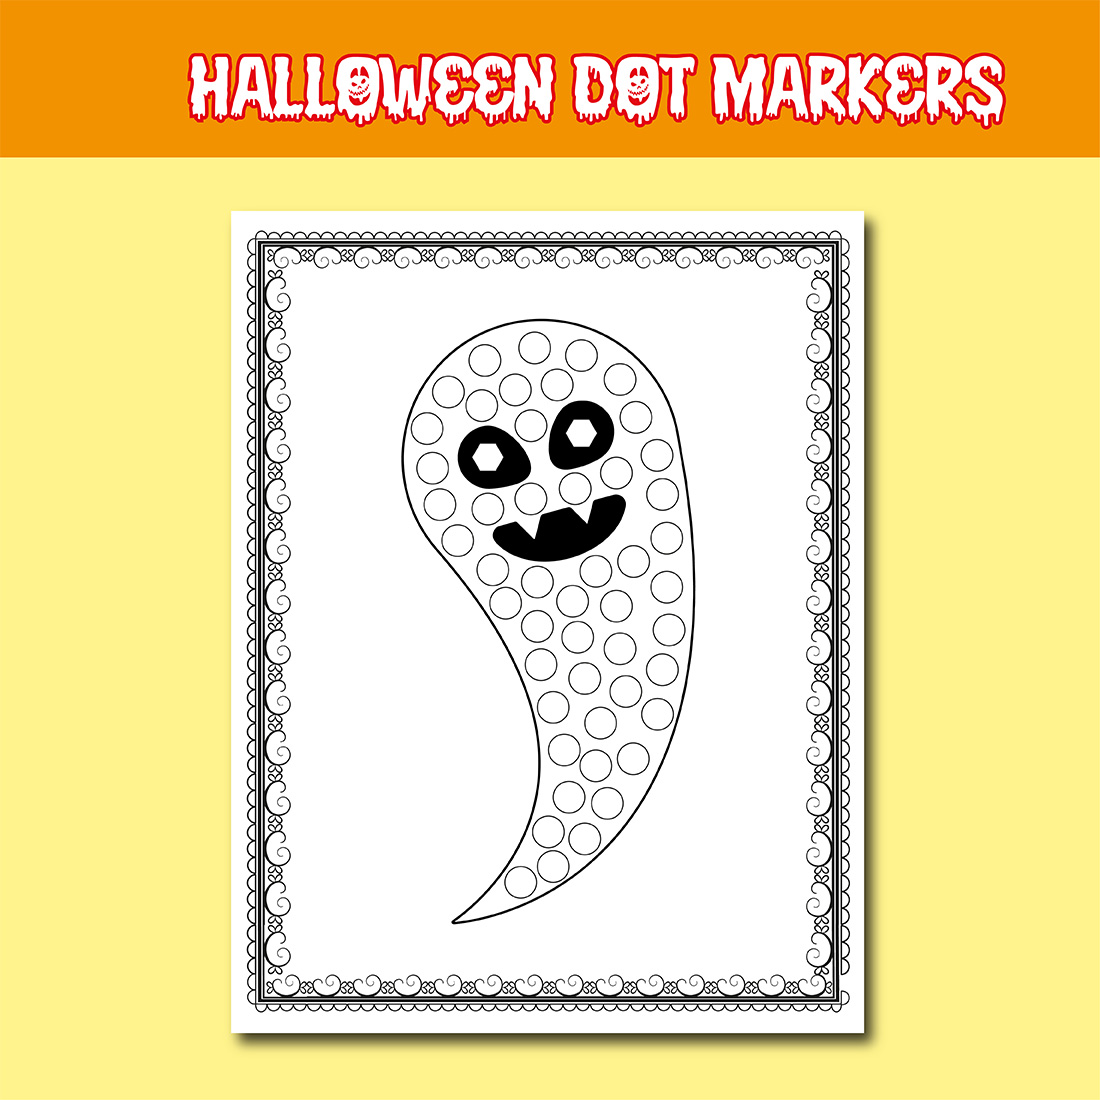 20 Pages Halloween Dot Markers Activity Book for print.